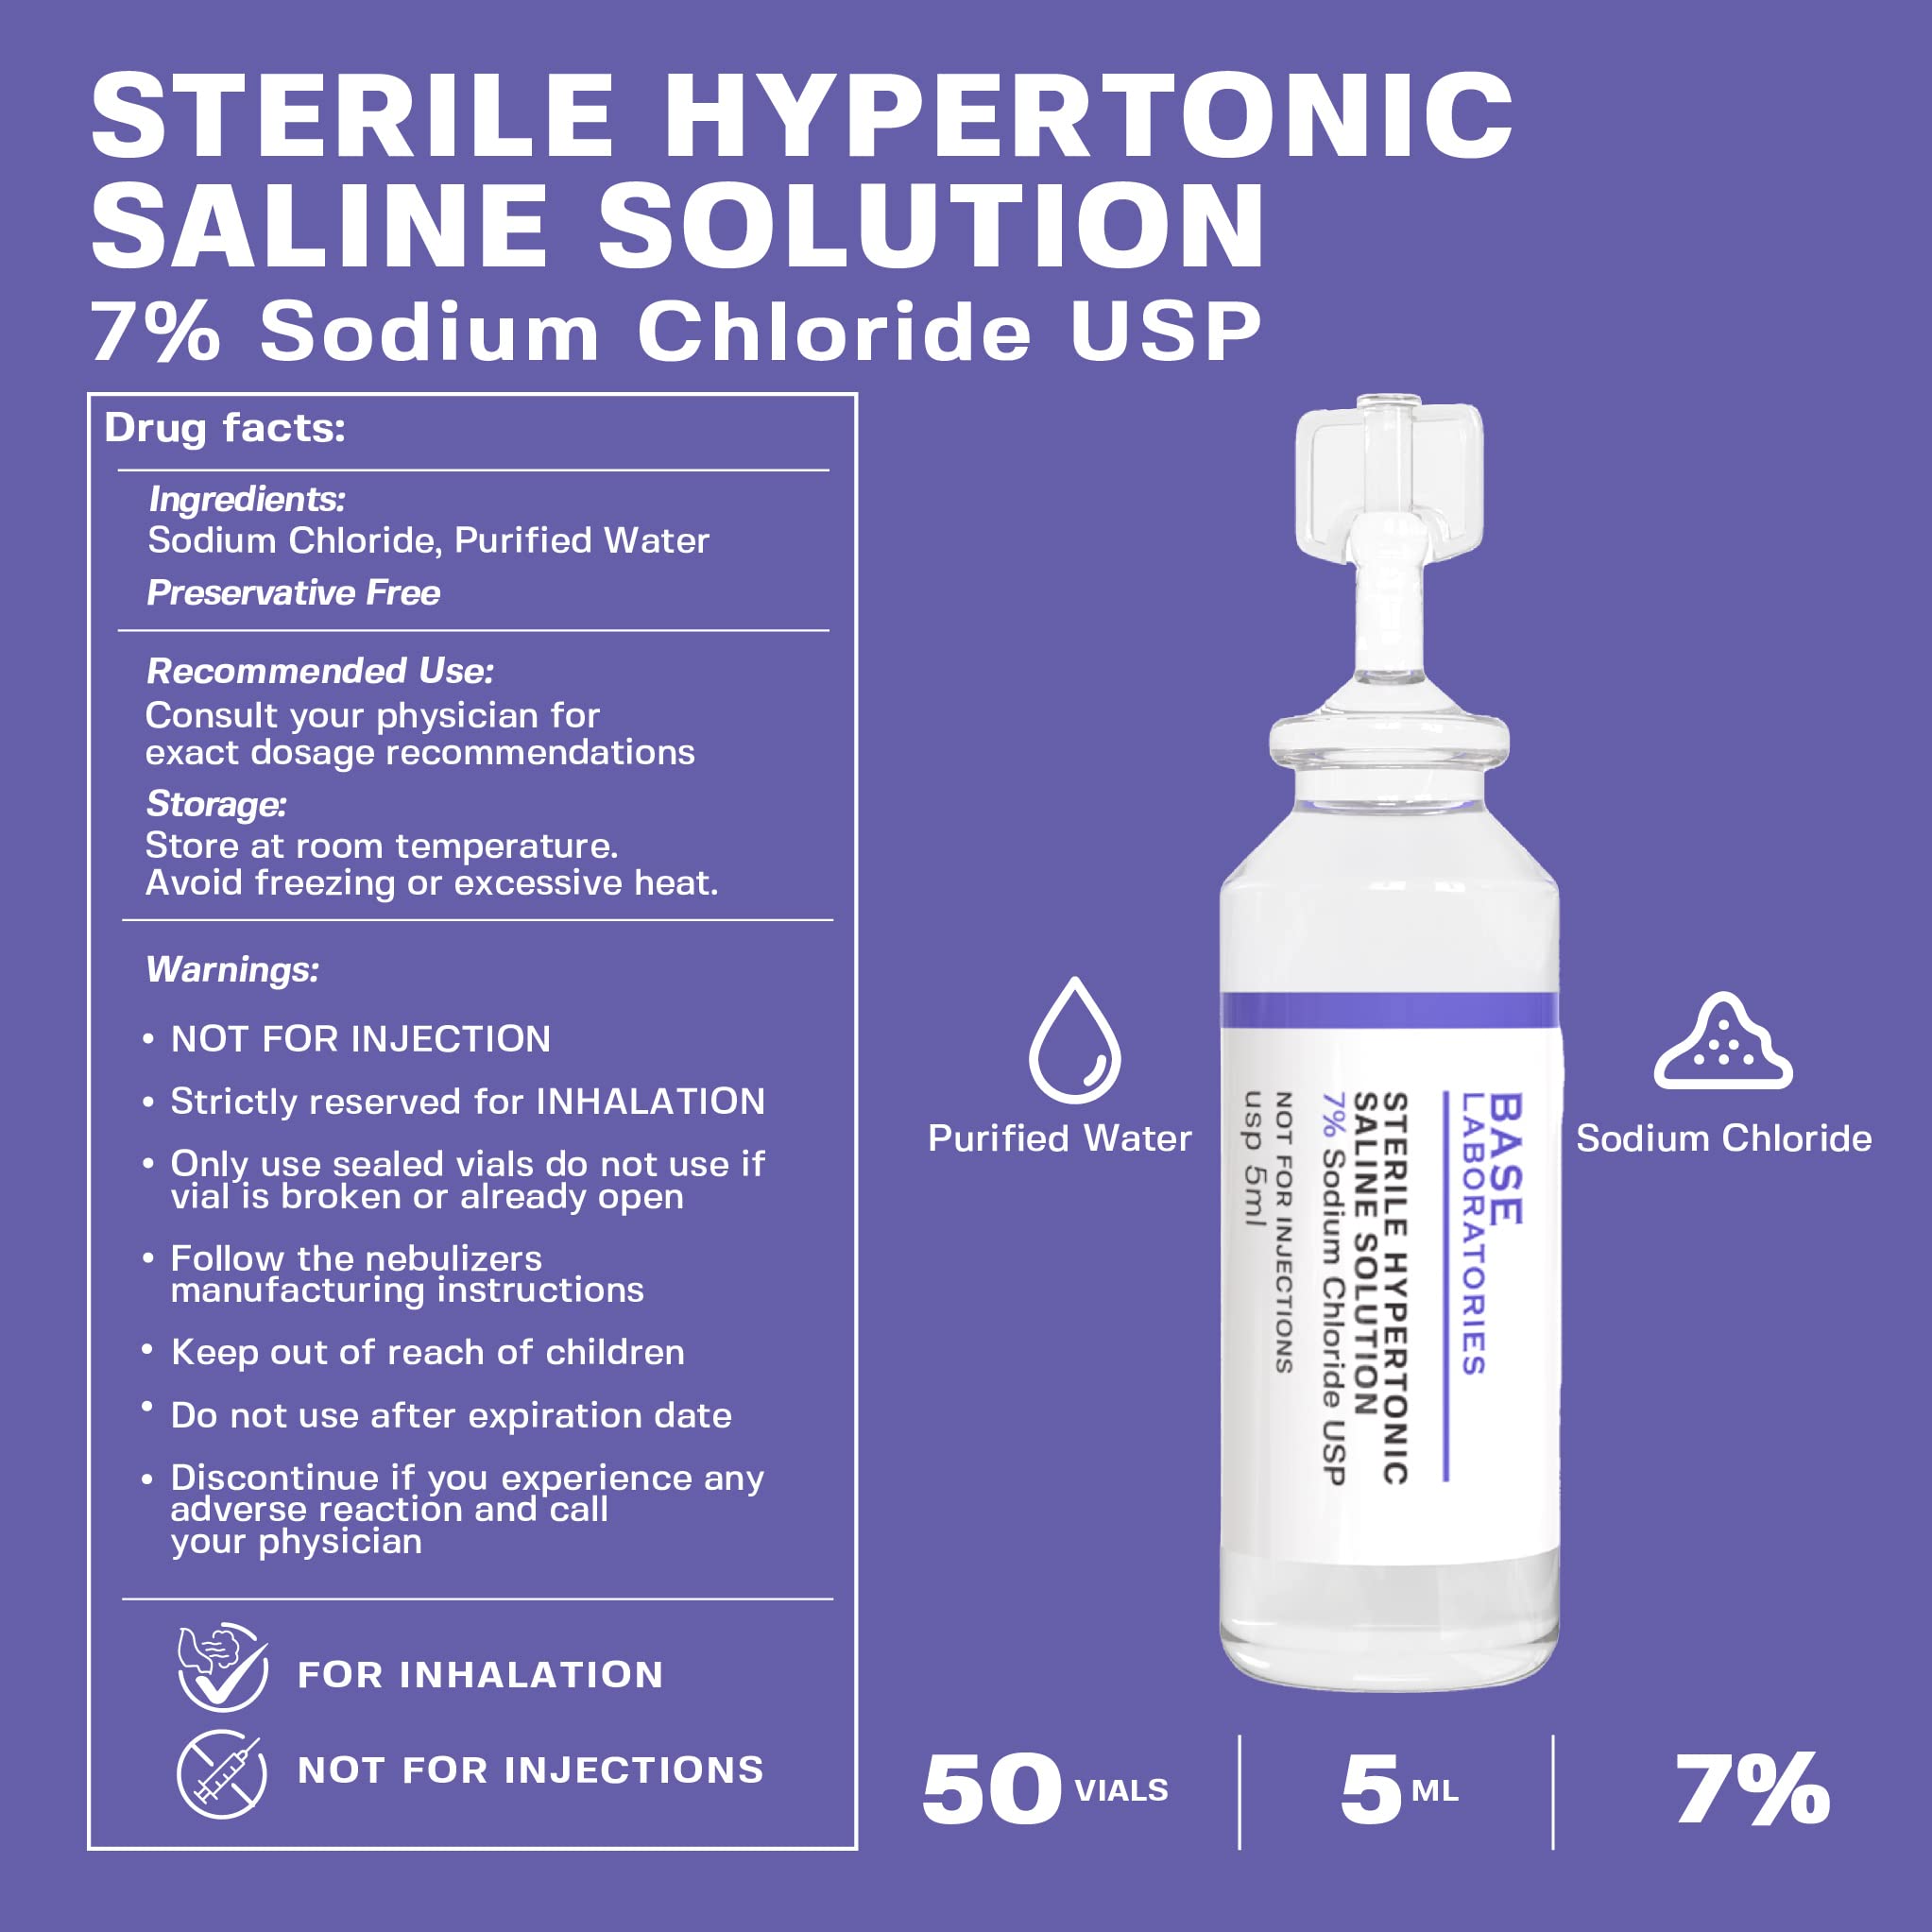 Base Labs 7% Hypertonic Saline Solution for Nebulizer Machine | Sterile Saline Solution for Inhalation| Helps with Respiratory Treatments, Clears Lungs, Mucus & Congestion l 50 Vials 5ml Unit Dose